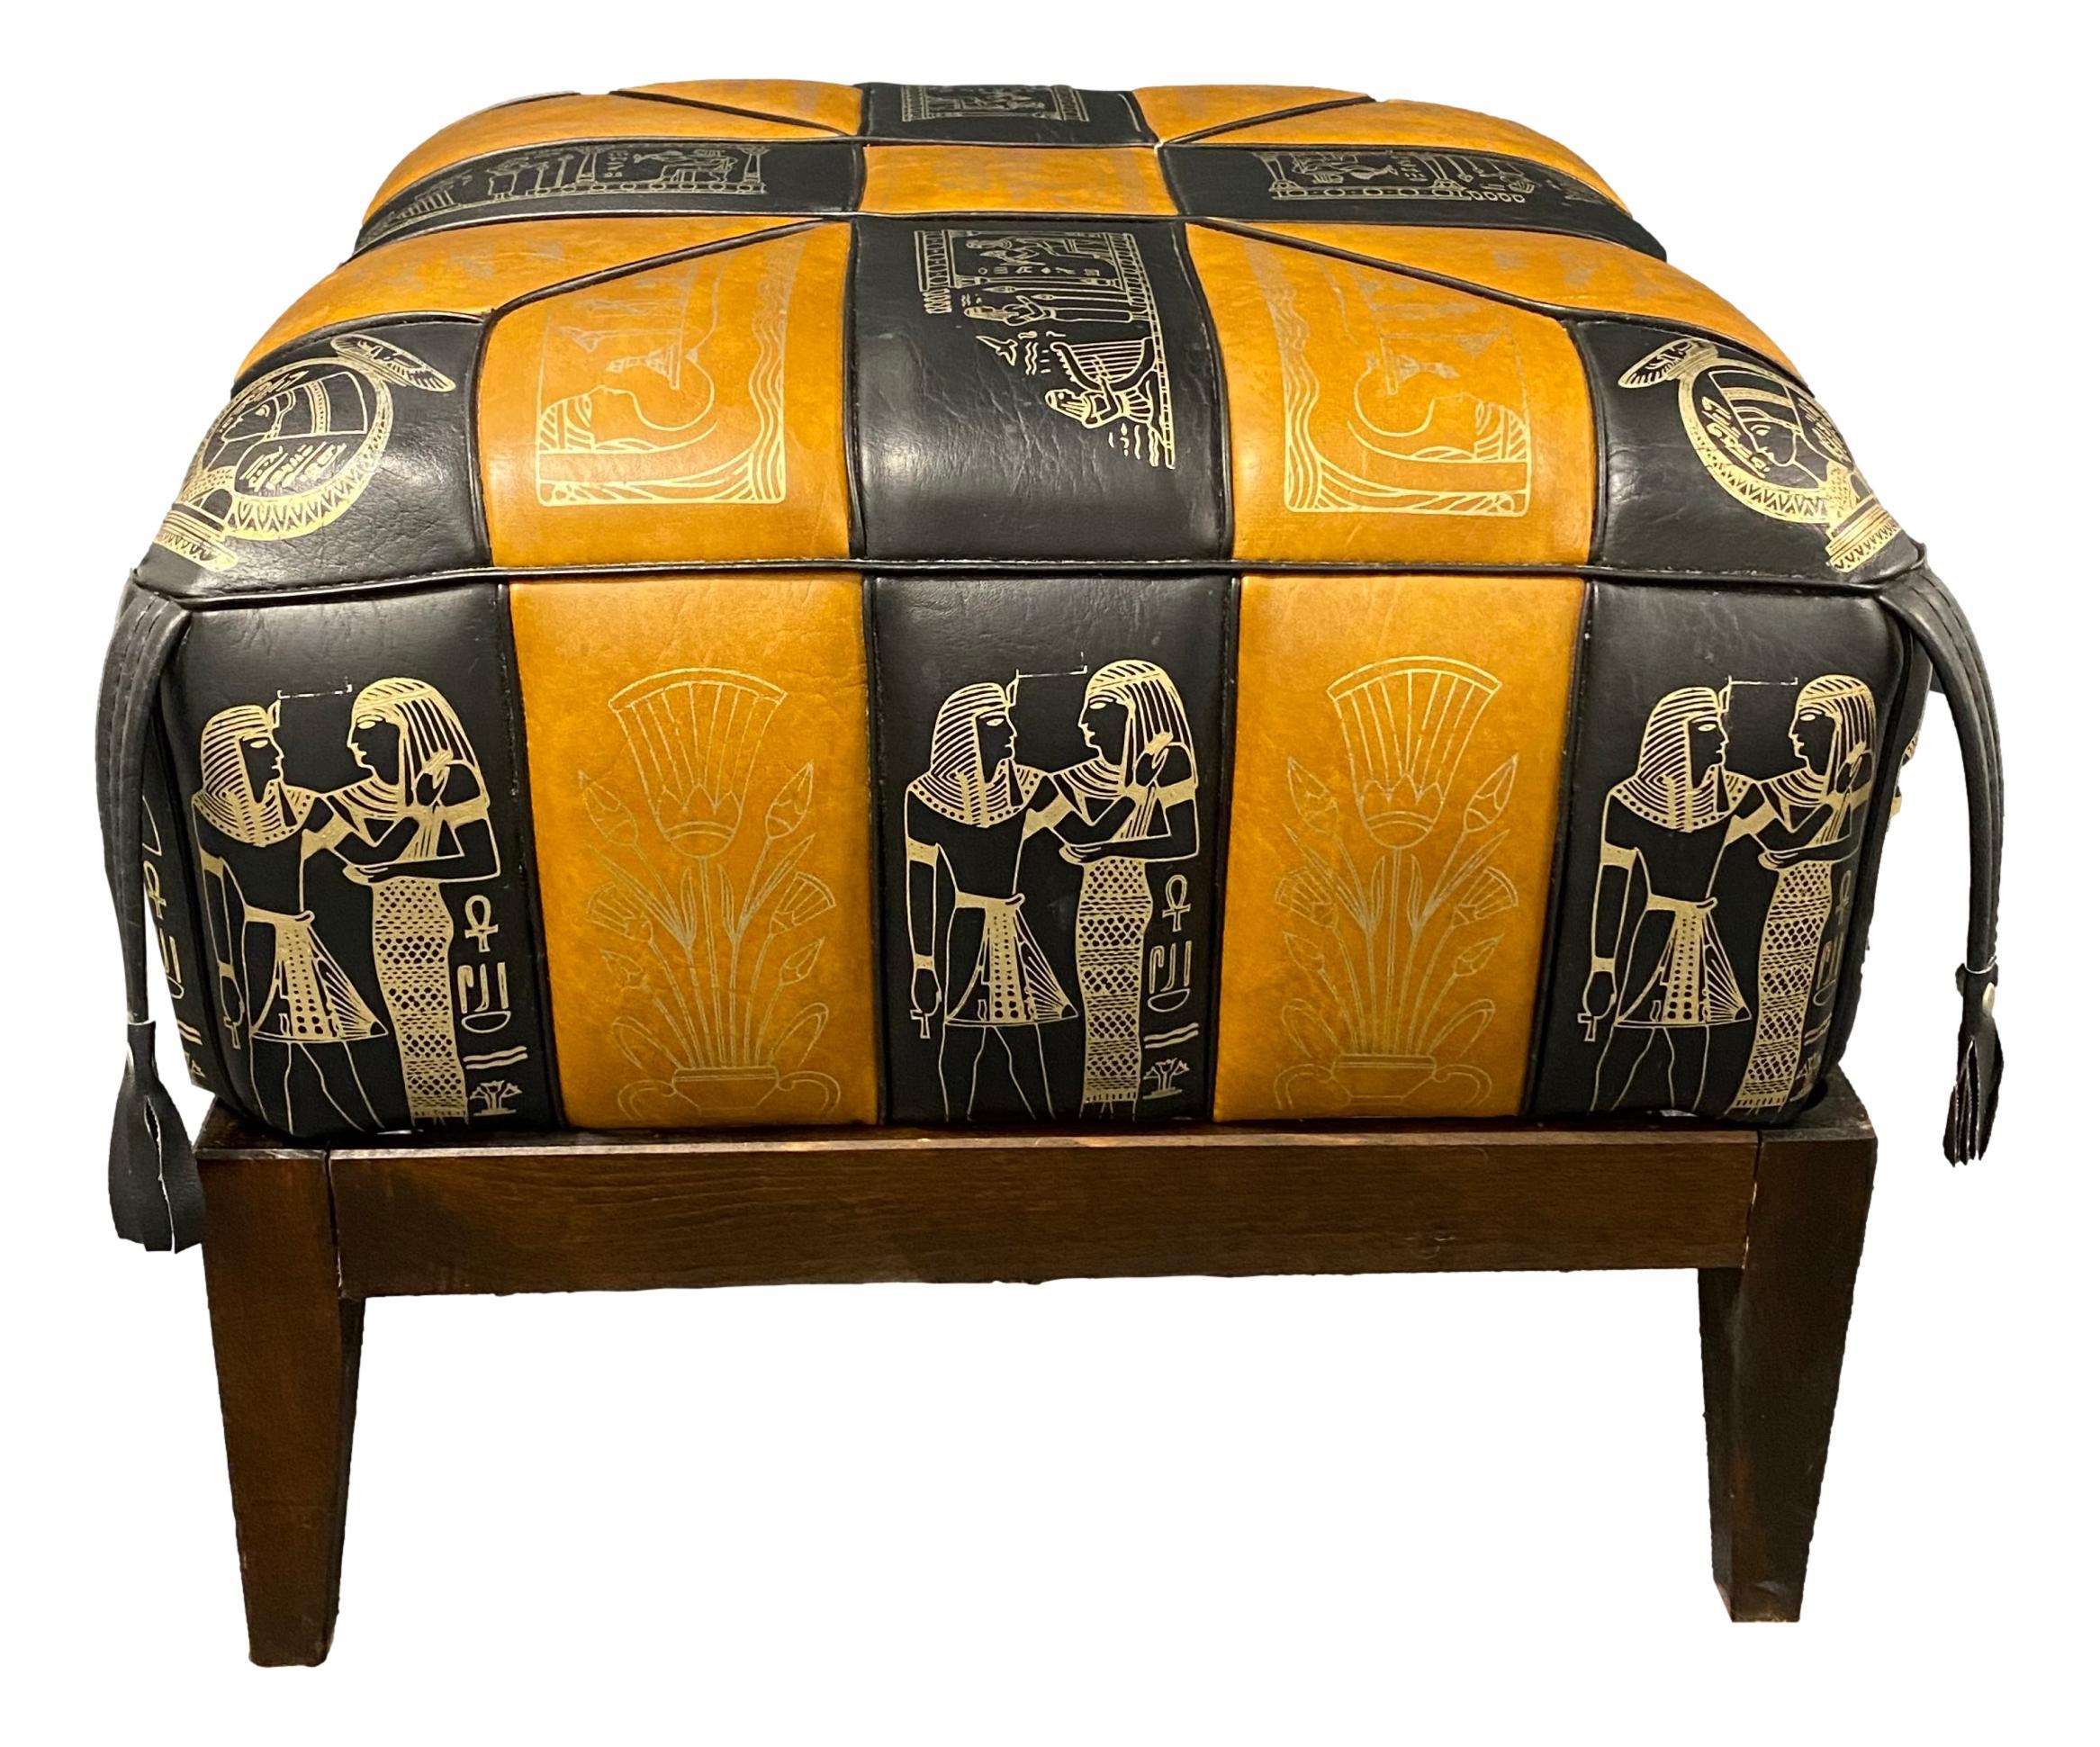 A beautiful leatherette footstool poof ottoman on a wooden frame. The leatherette poof is in a very good condition, wood with a nice patina, gives your living room a beautiful style.